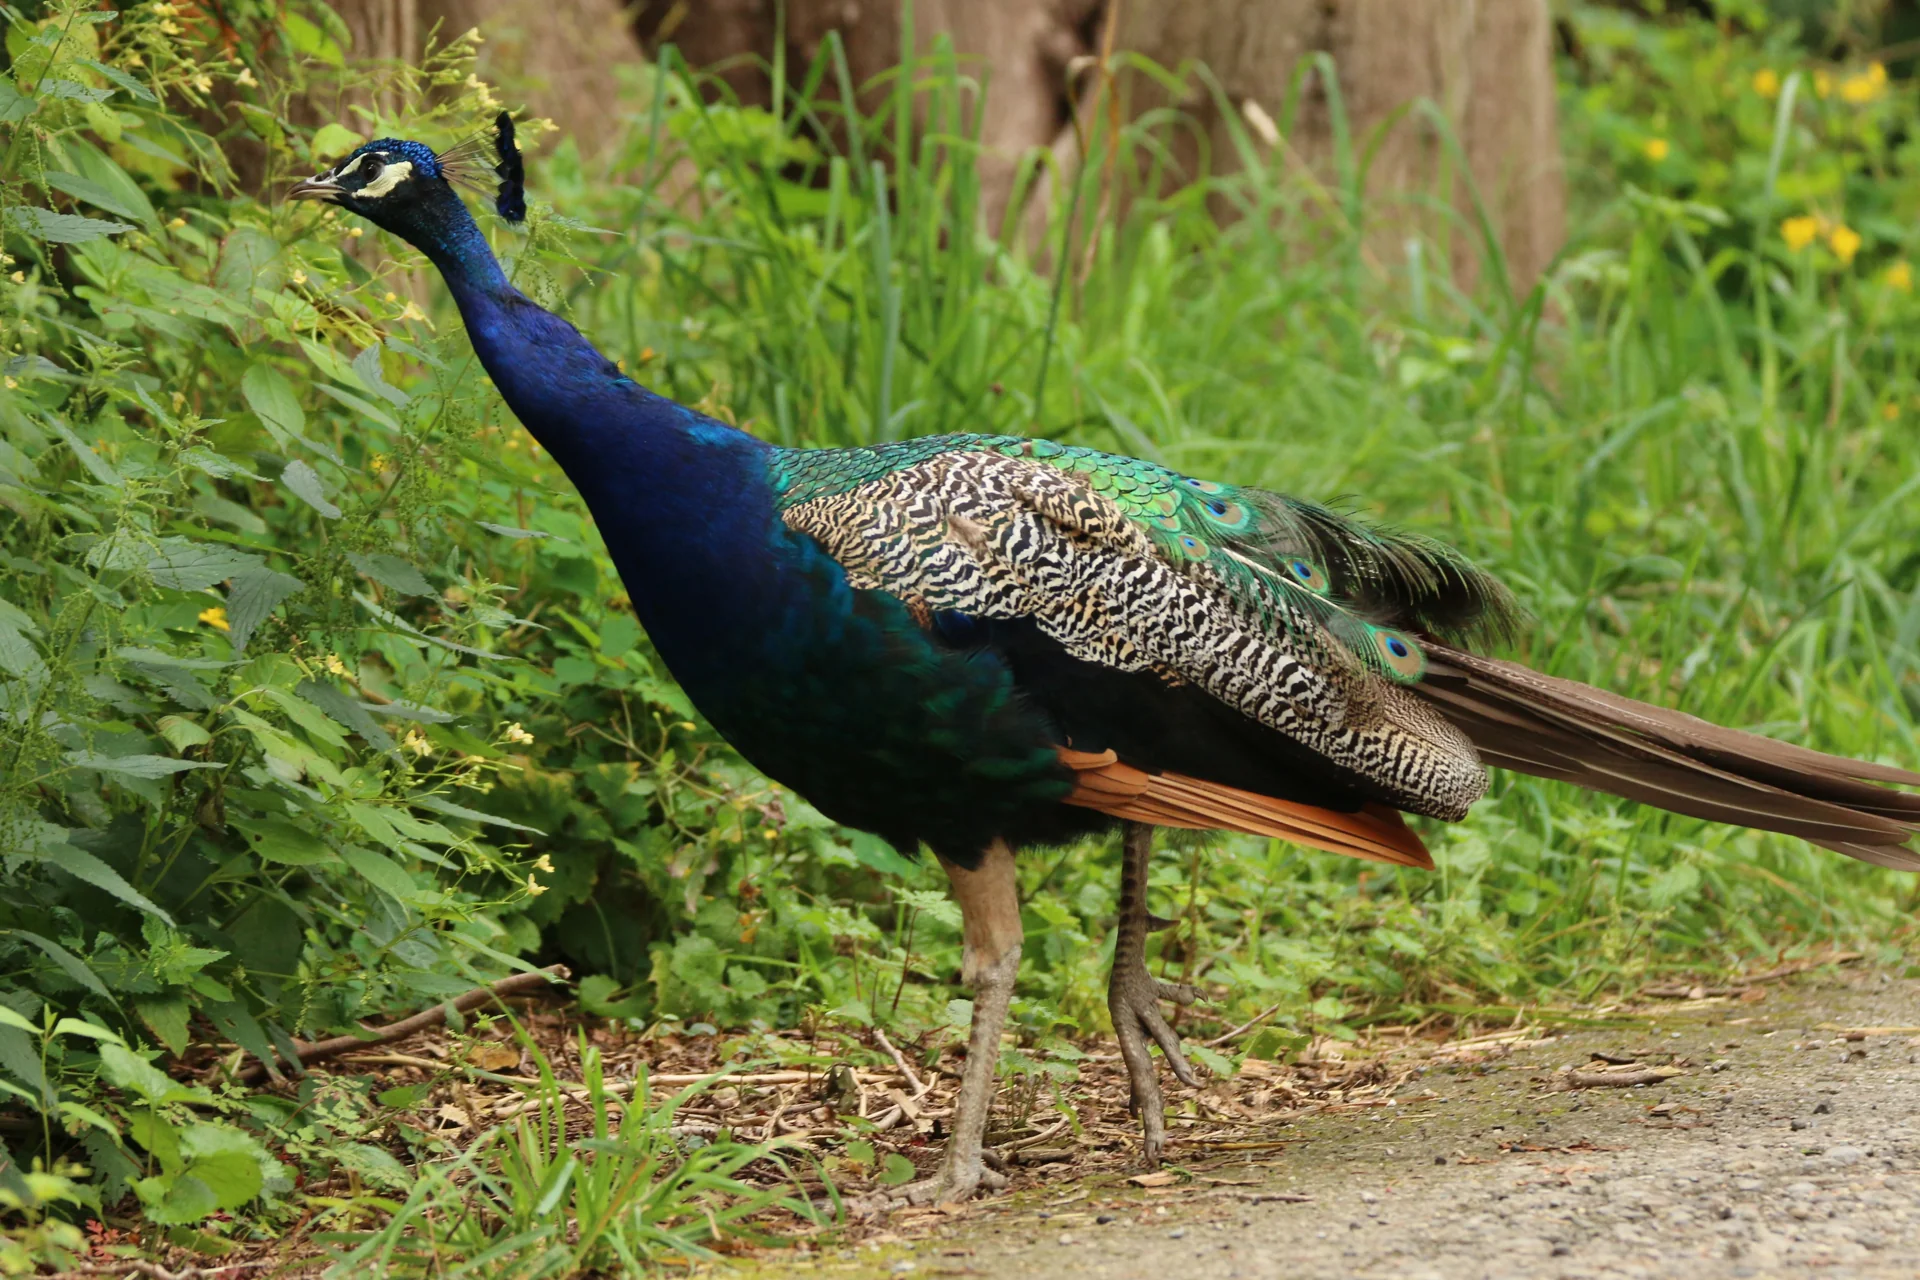 A blue peacock walking along the side of a path.